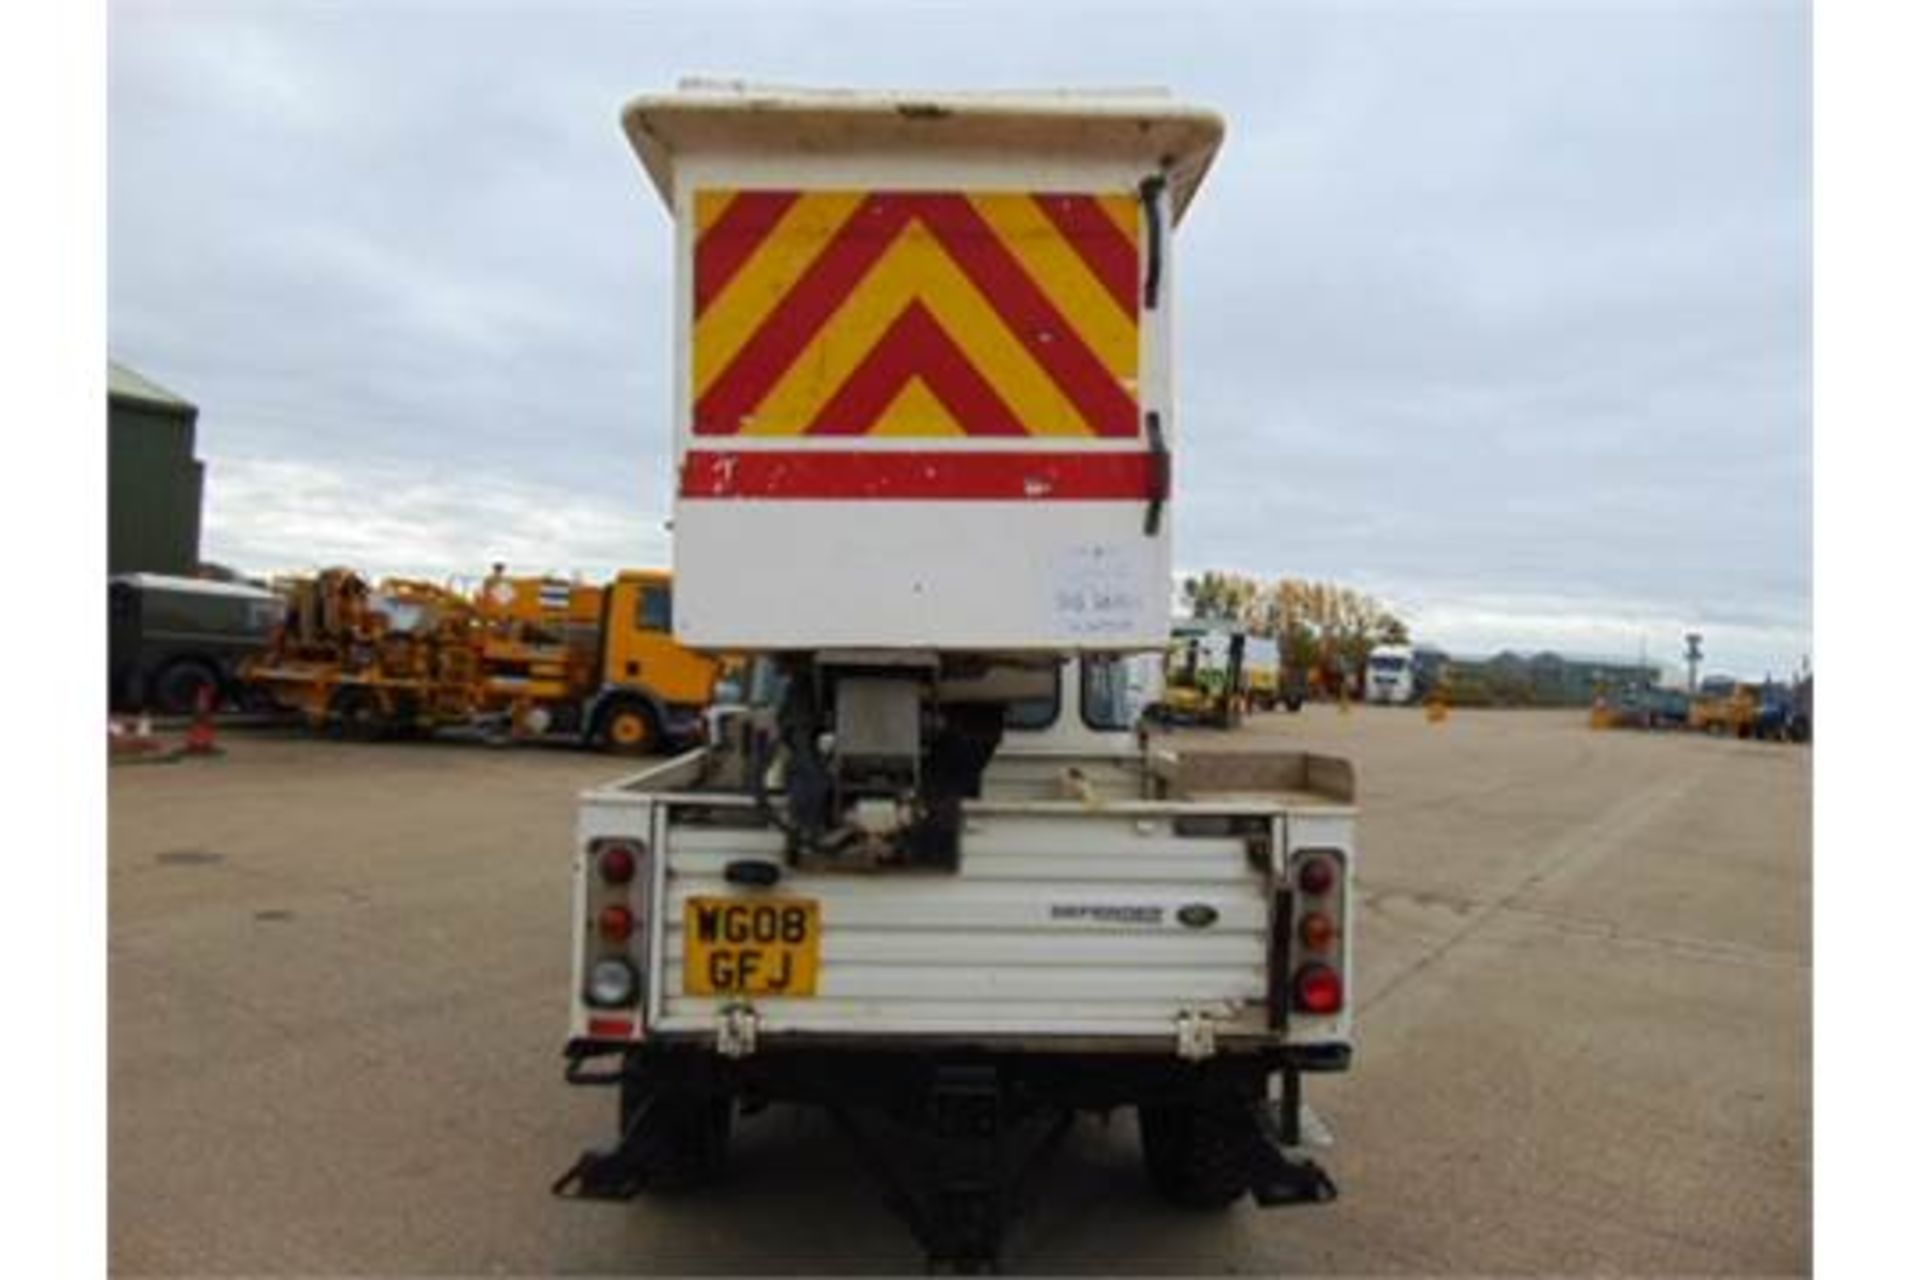 Land Rover Defender 110 High Capacity Cherry Picker - Image 10 of 34